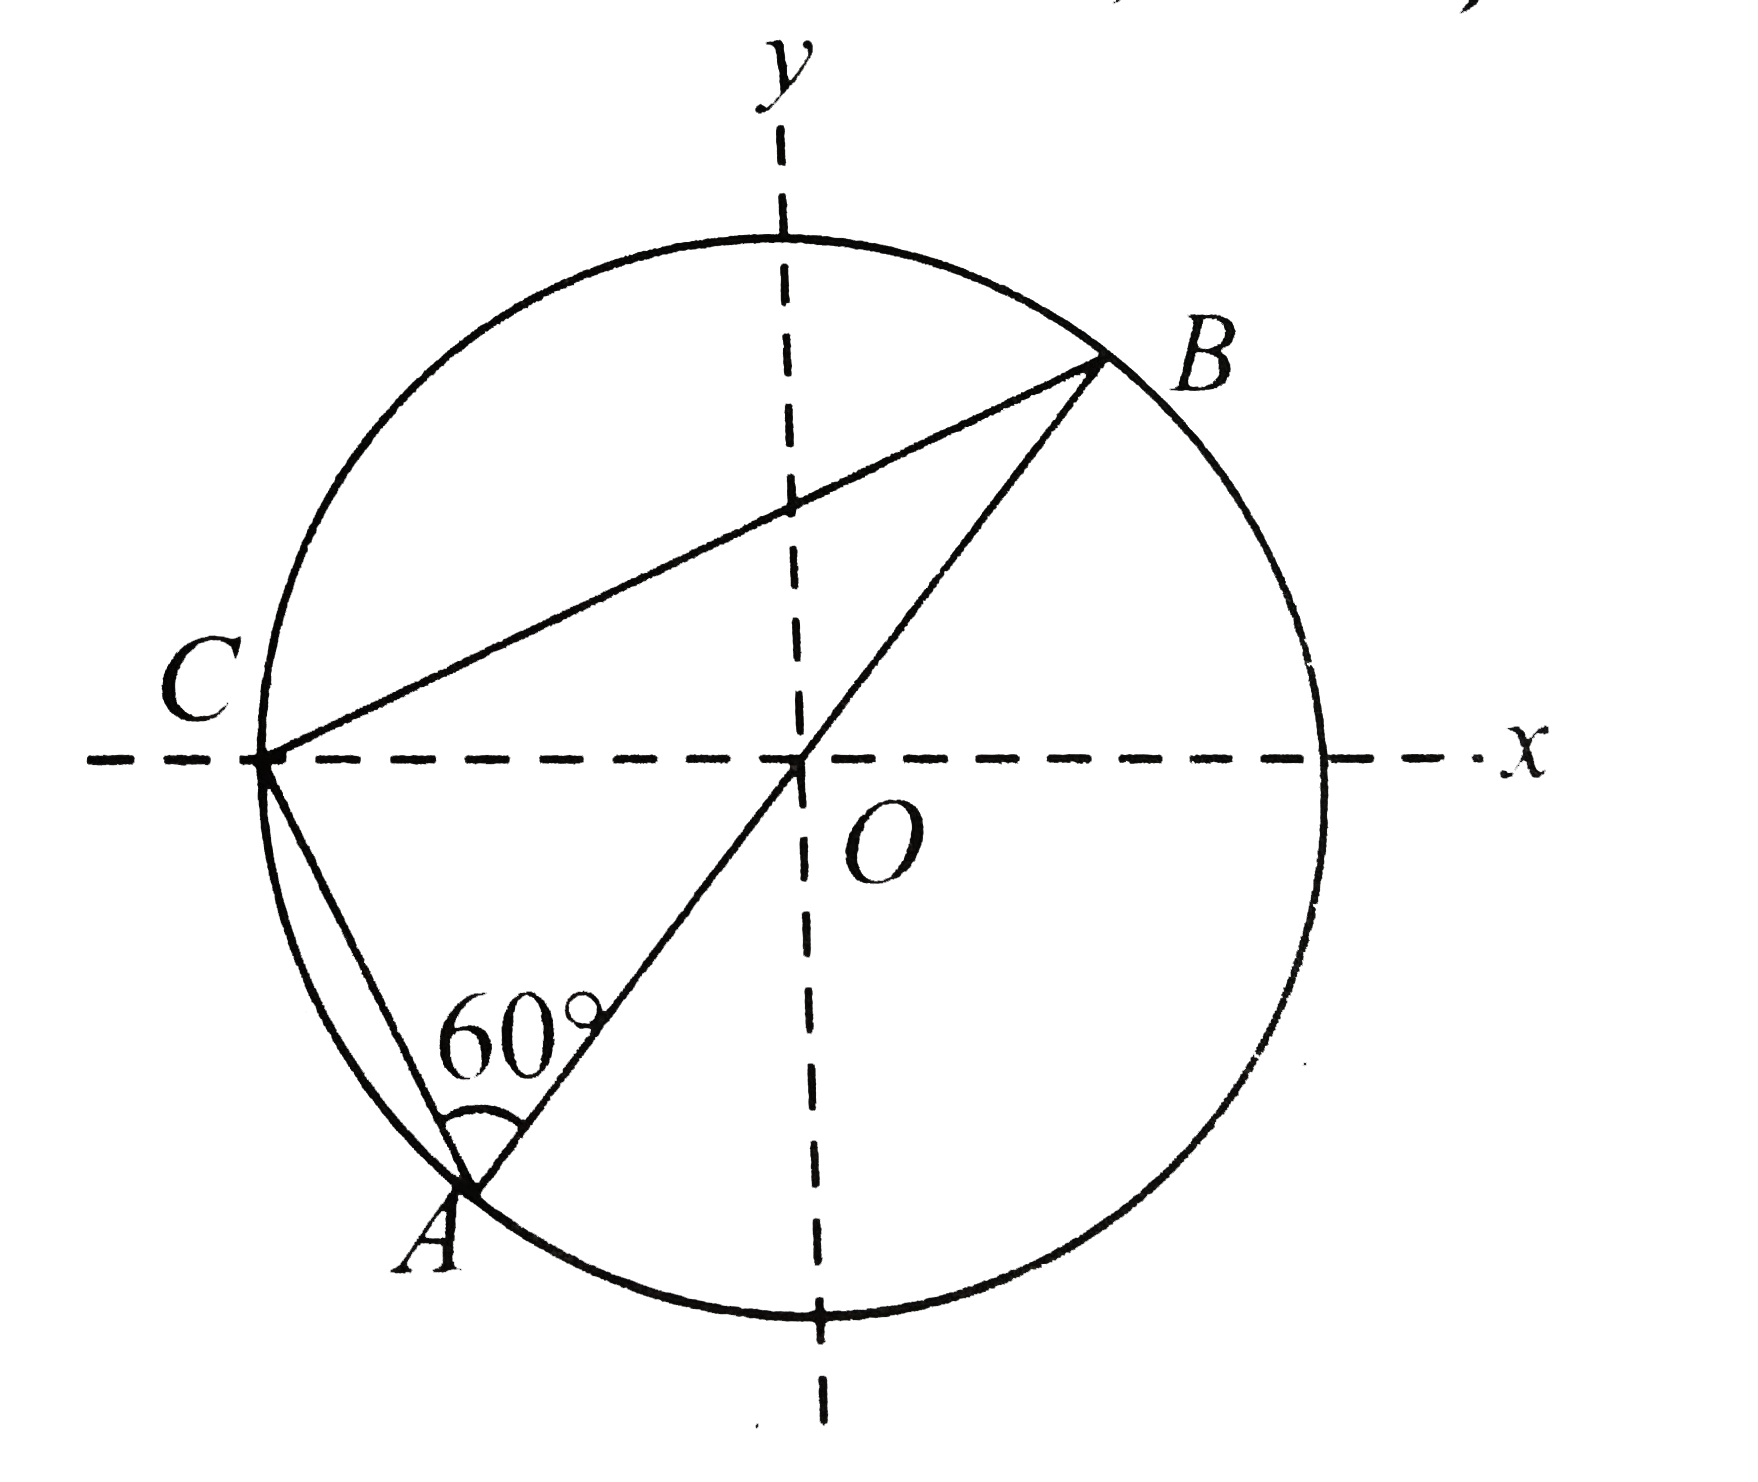 Consider a system of three charges q//3, q//3, and -2q//3 placed at points A, B, and C, respectively, as shown in figure. Take O to be the center of the circle of radius R and angle CAB = 60^@. Then